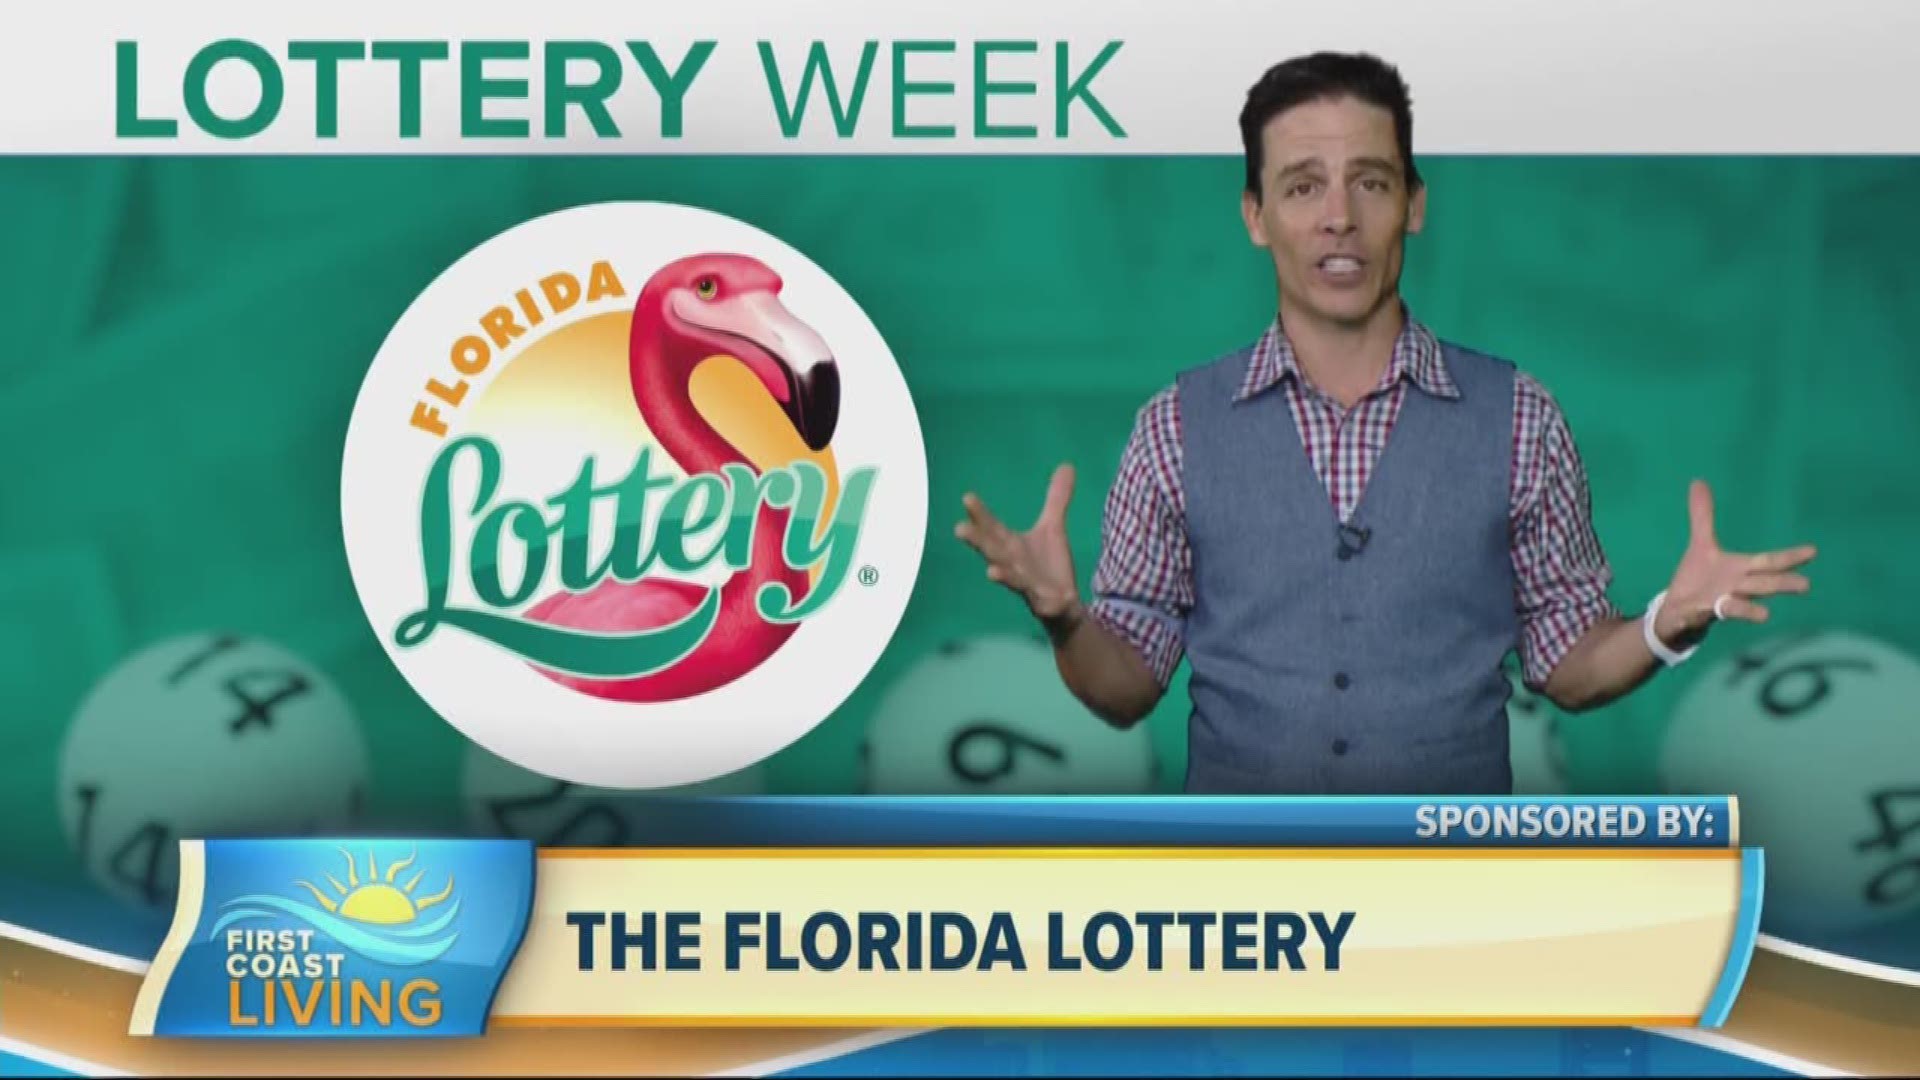 Did you know these quick facts about the Florida Lottery?